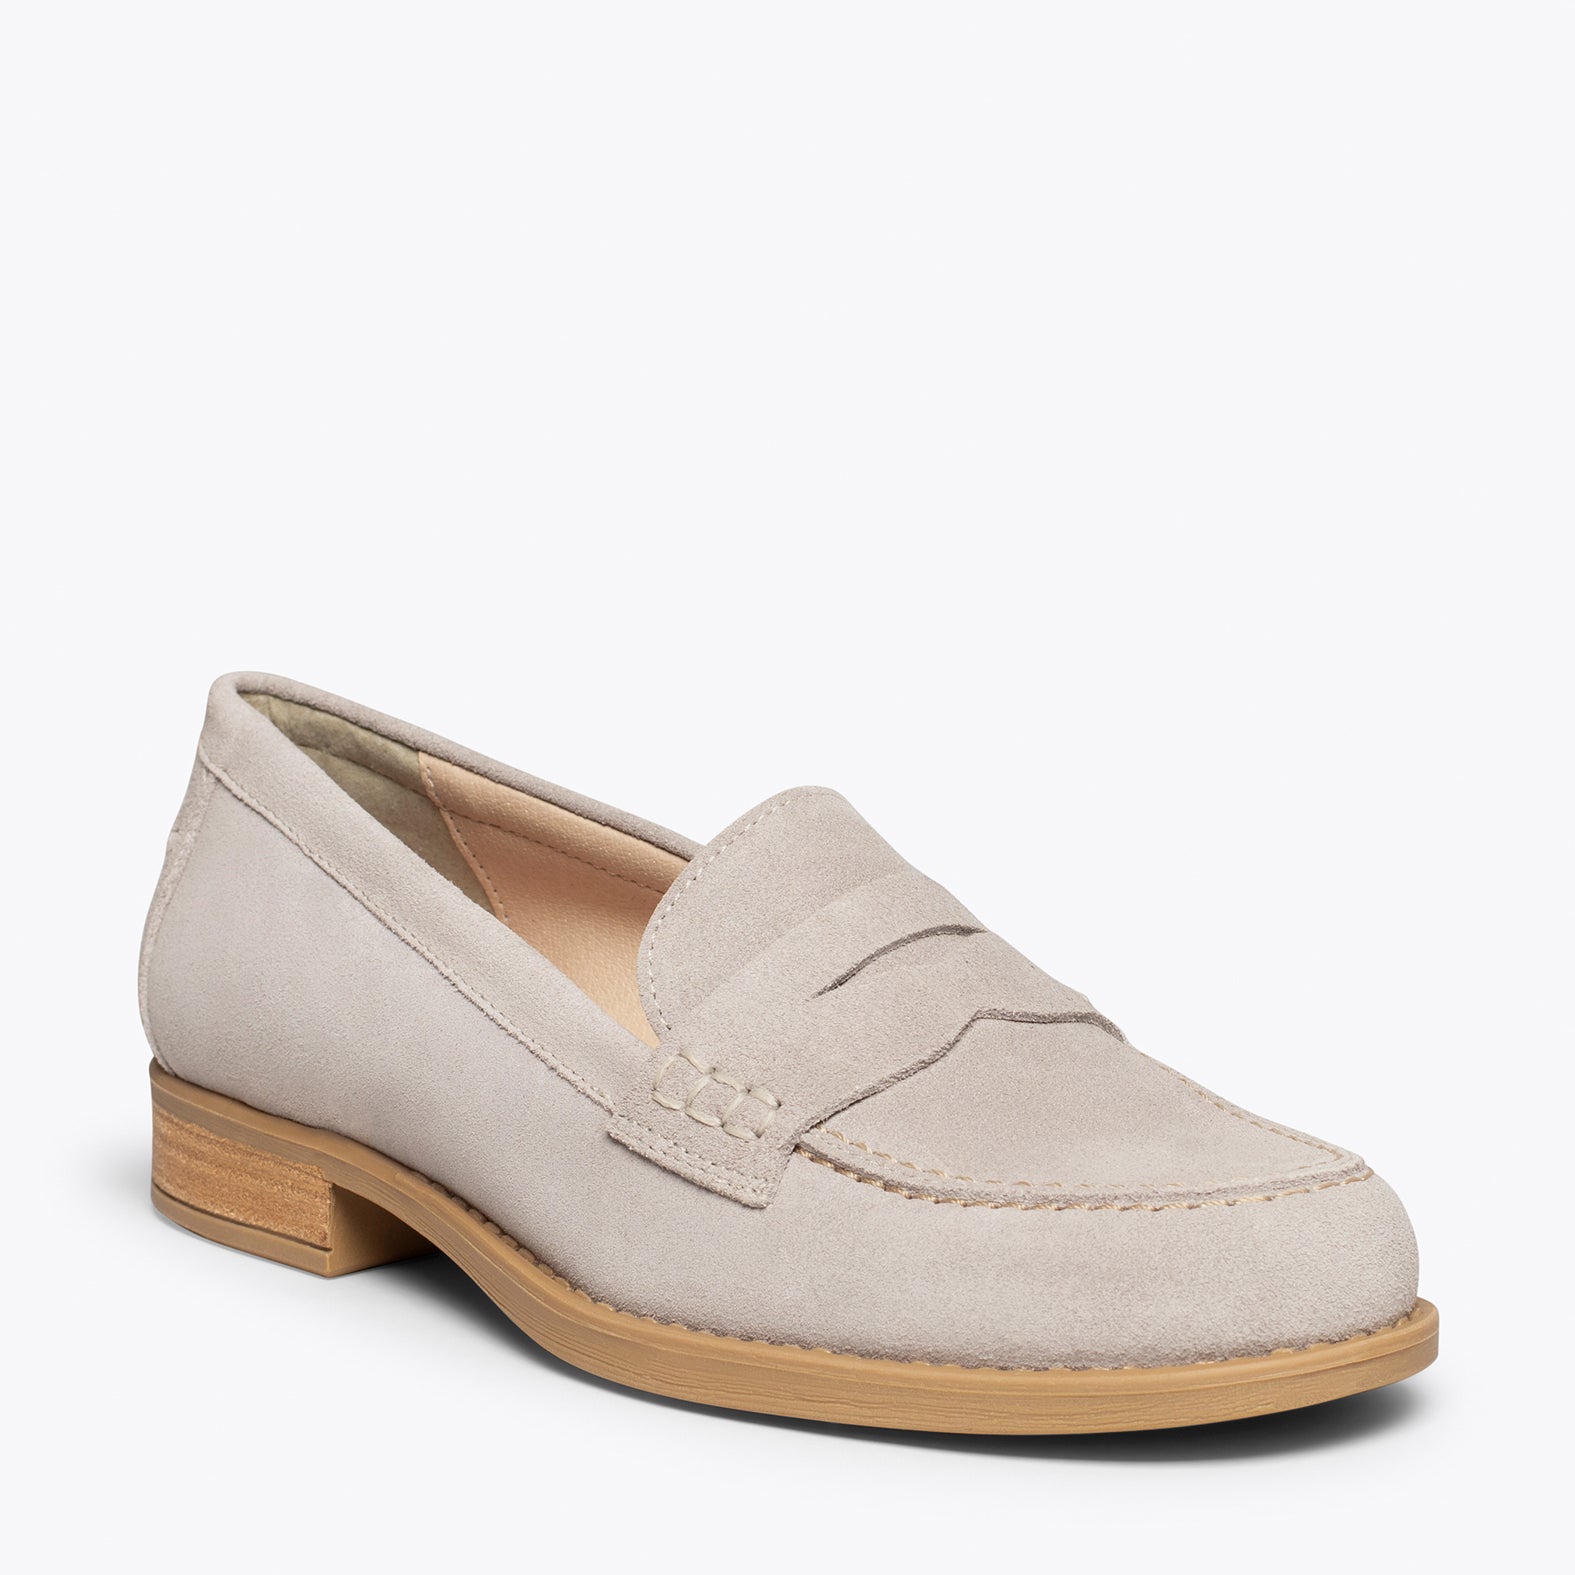 CASTELLANO – GREY suede leather moccasin